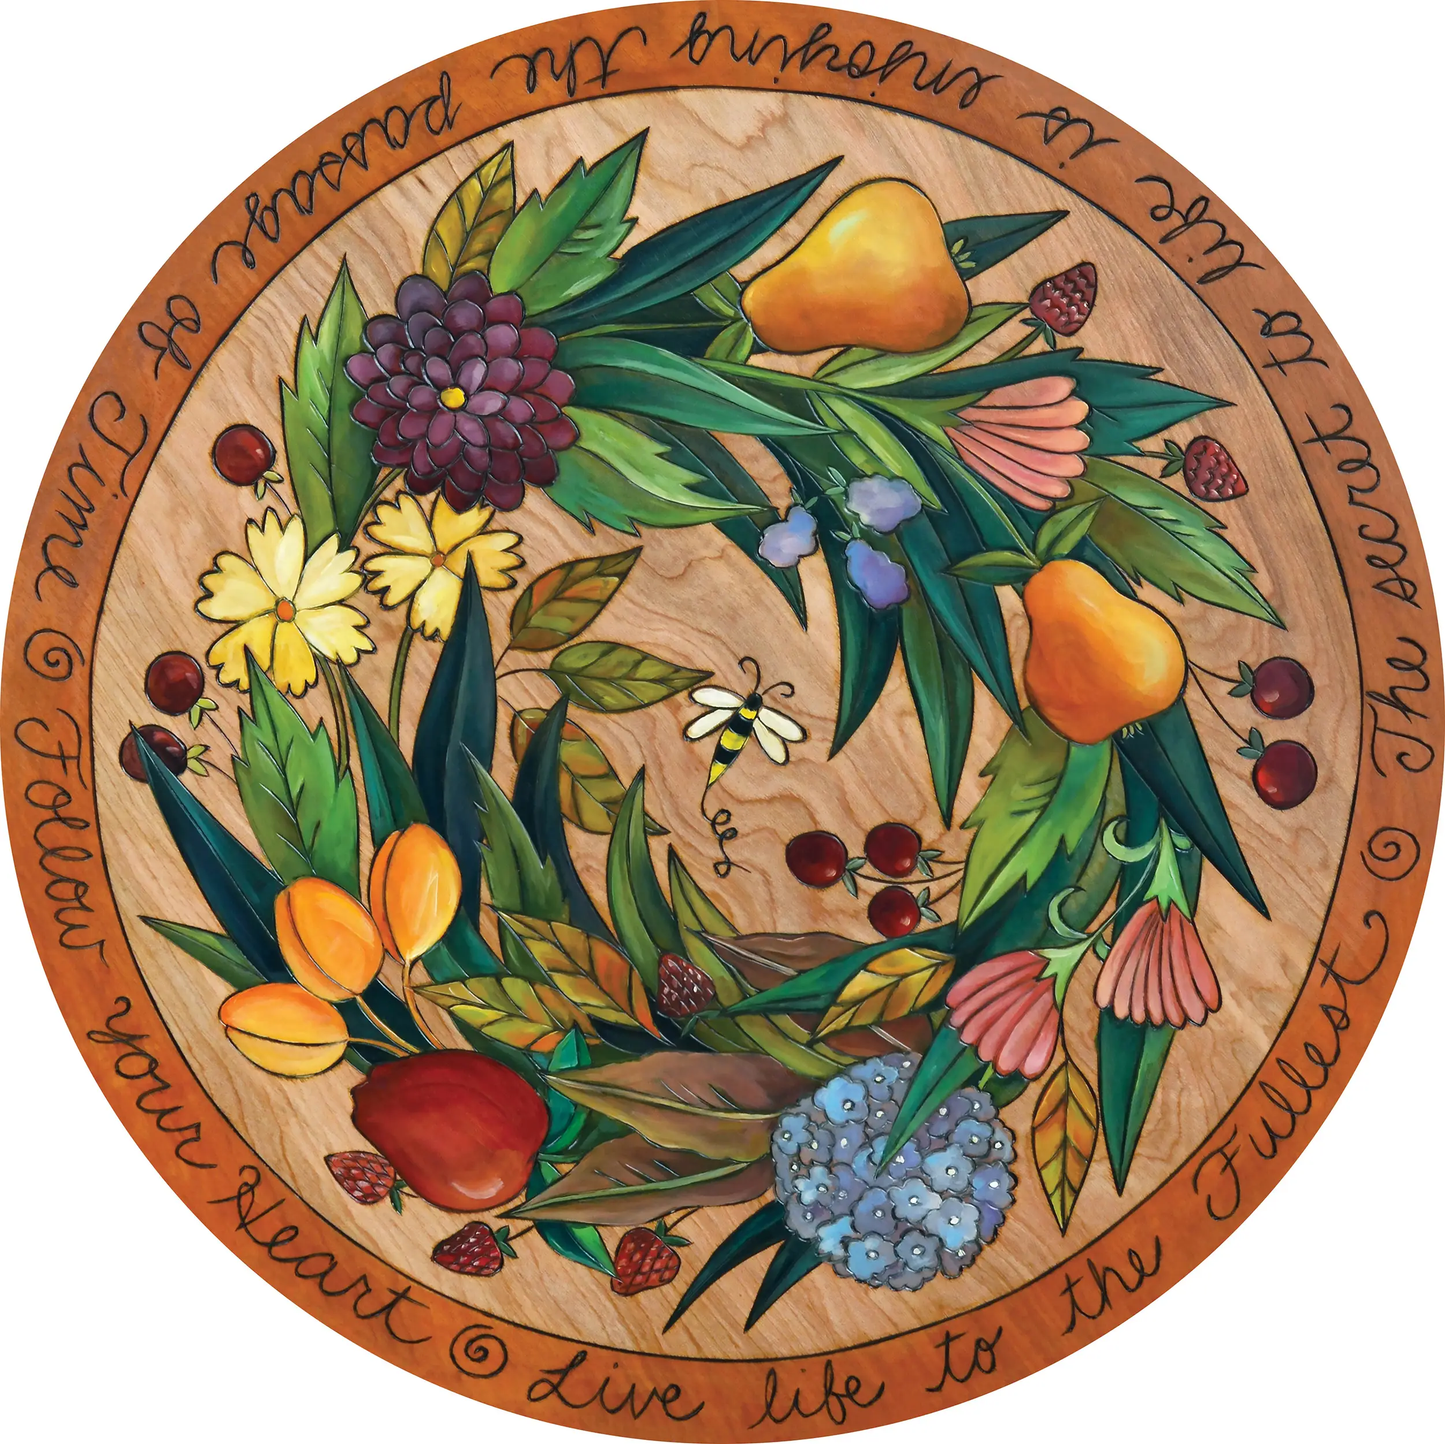 sincerely sticks lazy susan bee heaven, 18 inch natural wood tones handprinted flowers and fruit in the middle with words around the outside live life to the fullest, follow your heart, and more